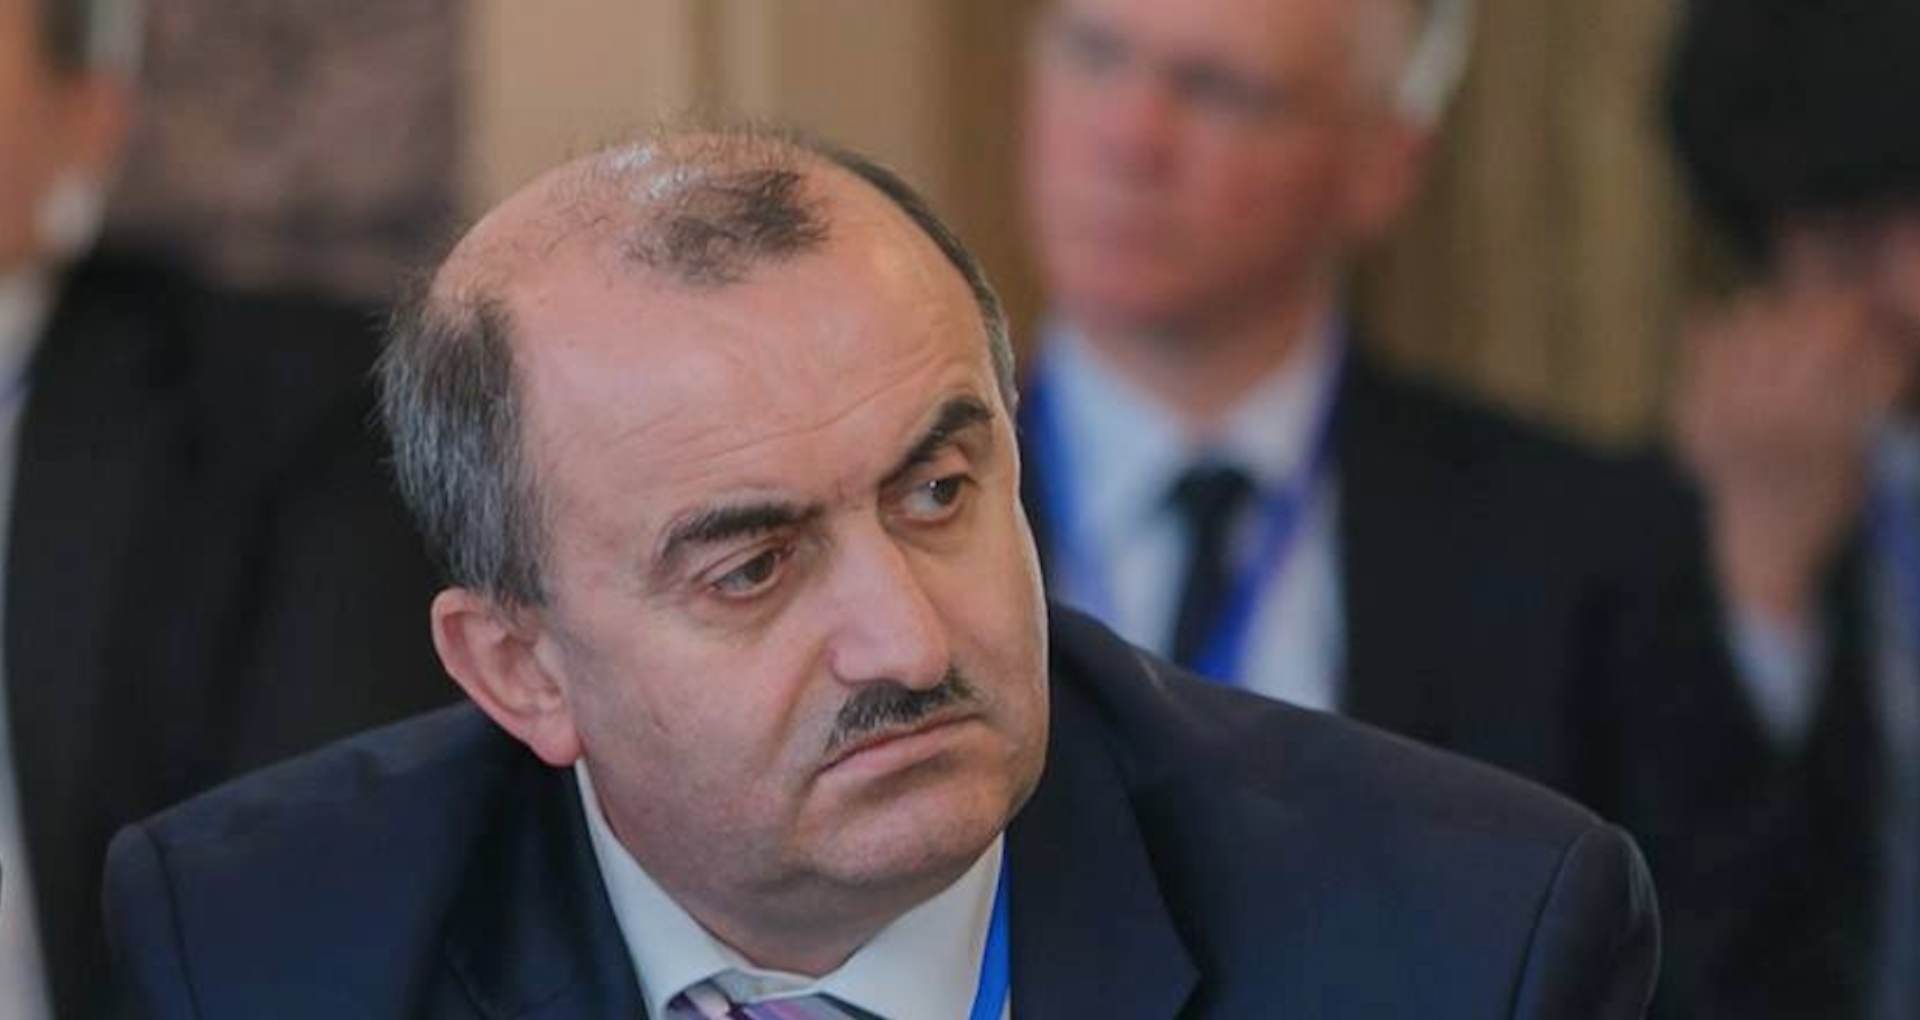 Another criminal case of former Moldovan Railways chief Iurii Topala sent to trial: fraudulent leasing of locomotives on the left bank of the Dniester River, with damages of over 5 million lei